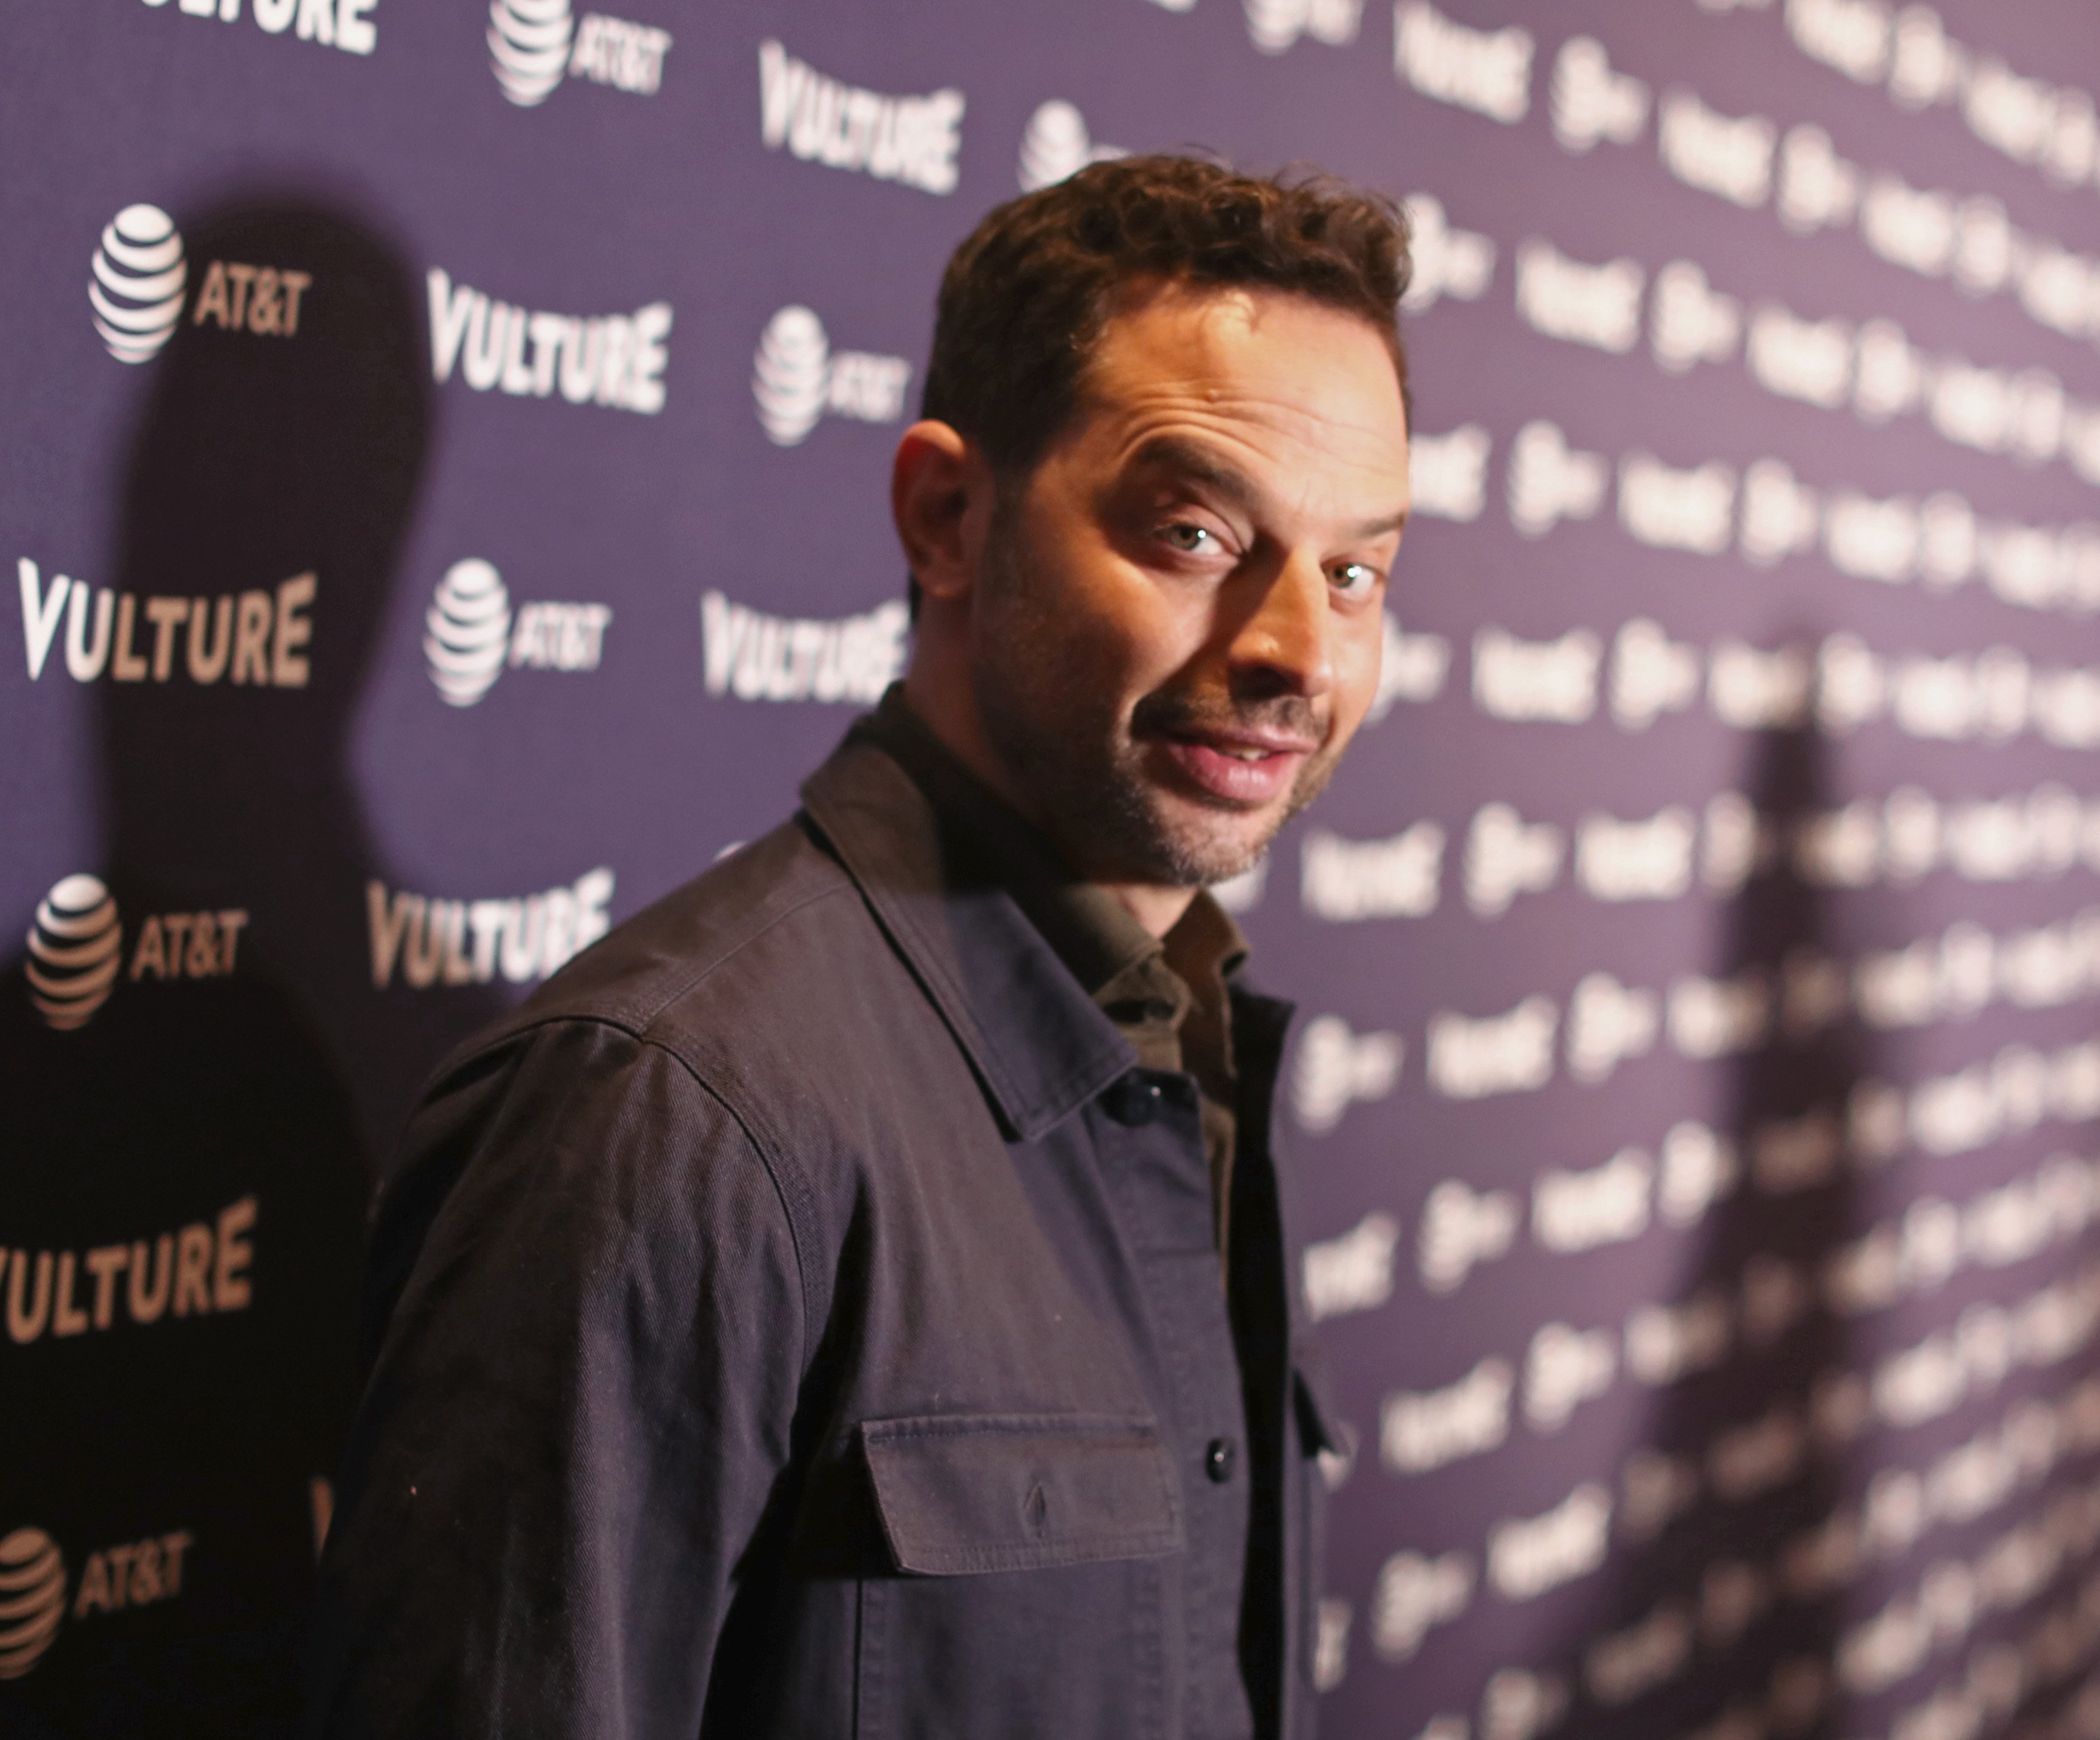 Nick Kroll speaks during the 'Big Mouth' One Man Table Read during Vulture Festival presented by AT&T at the Hollywood Roosevelt Hotel on November 17, 2018 in Hollywood, California.